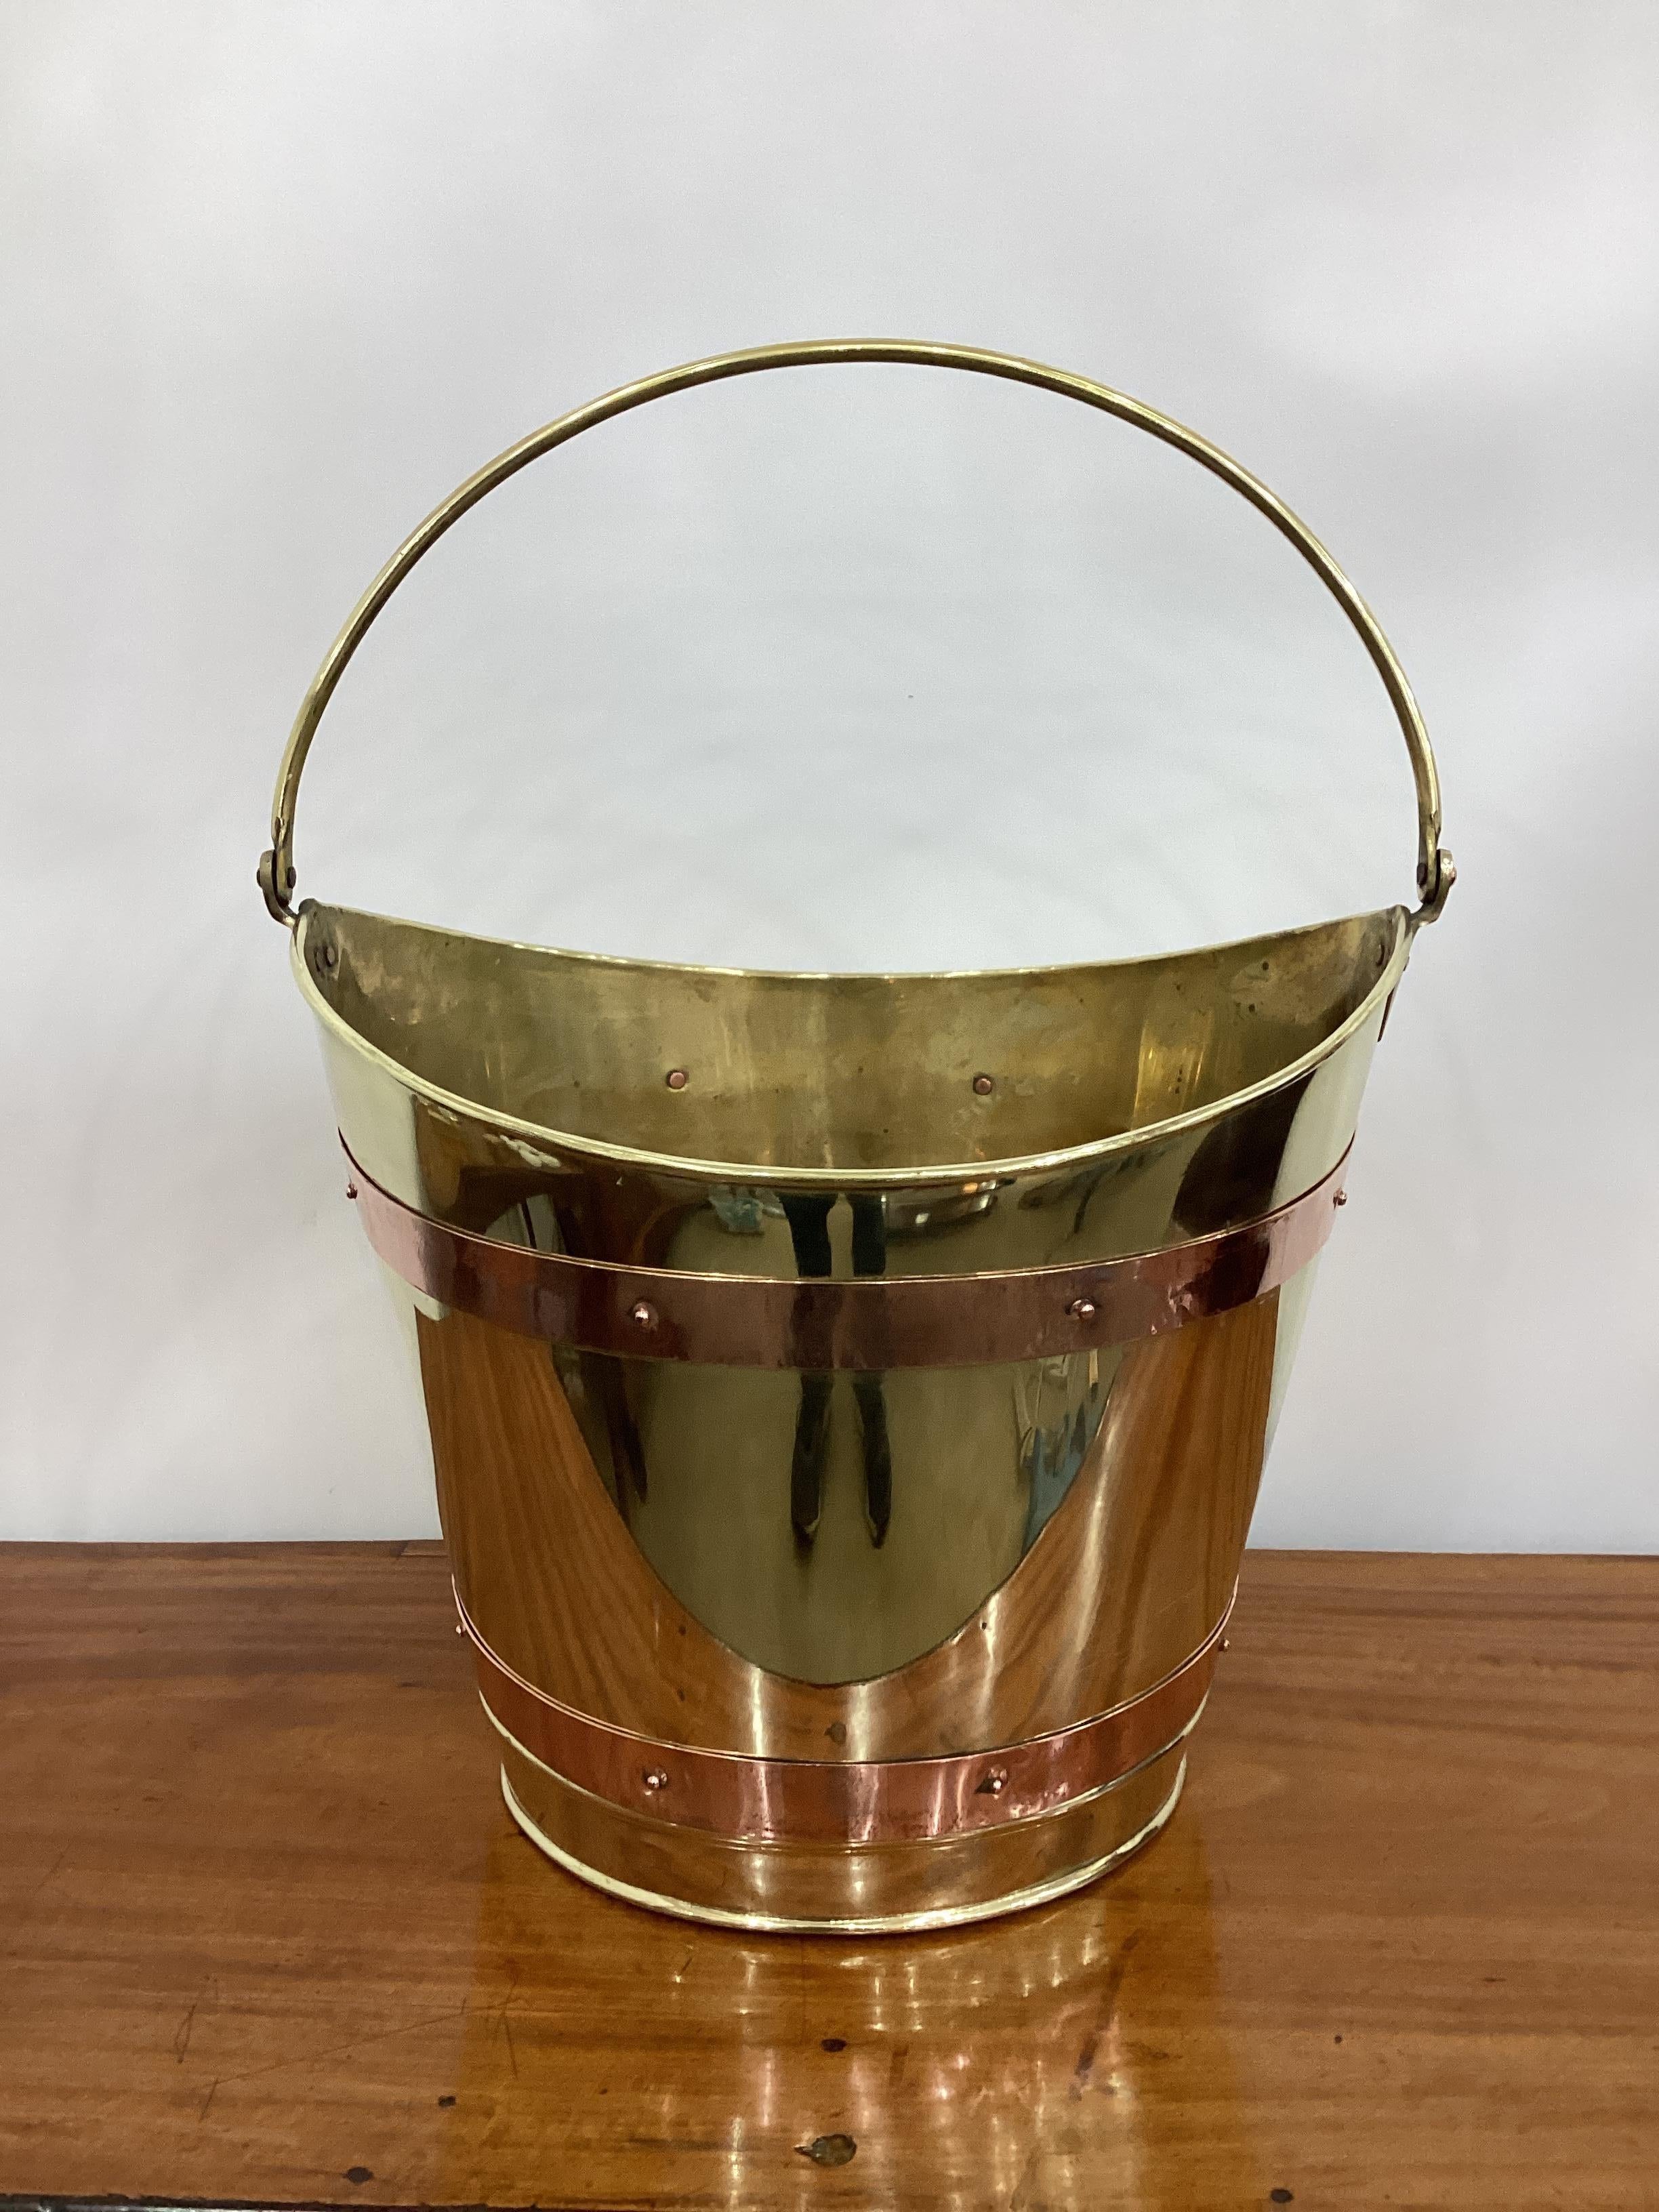 Vintage Brass with Copper Banding Navette Bucket. Perfect for a plant or besides a fireplace for kindling.
